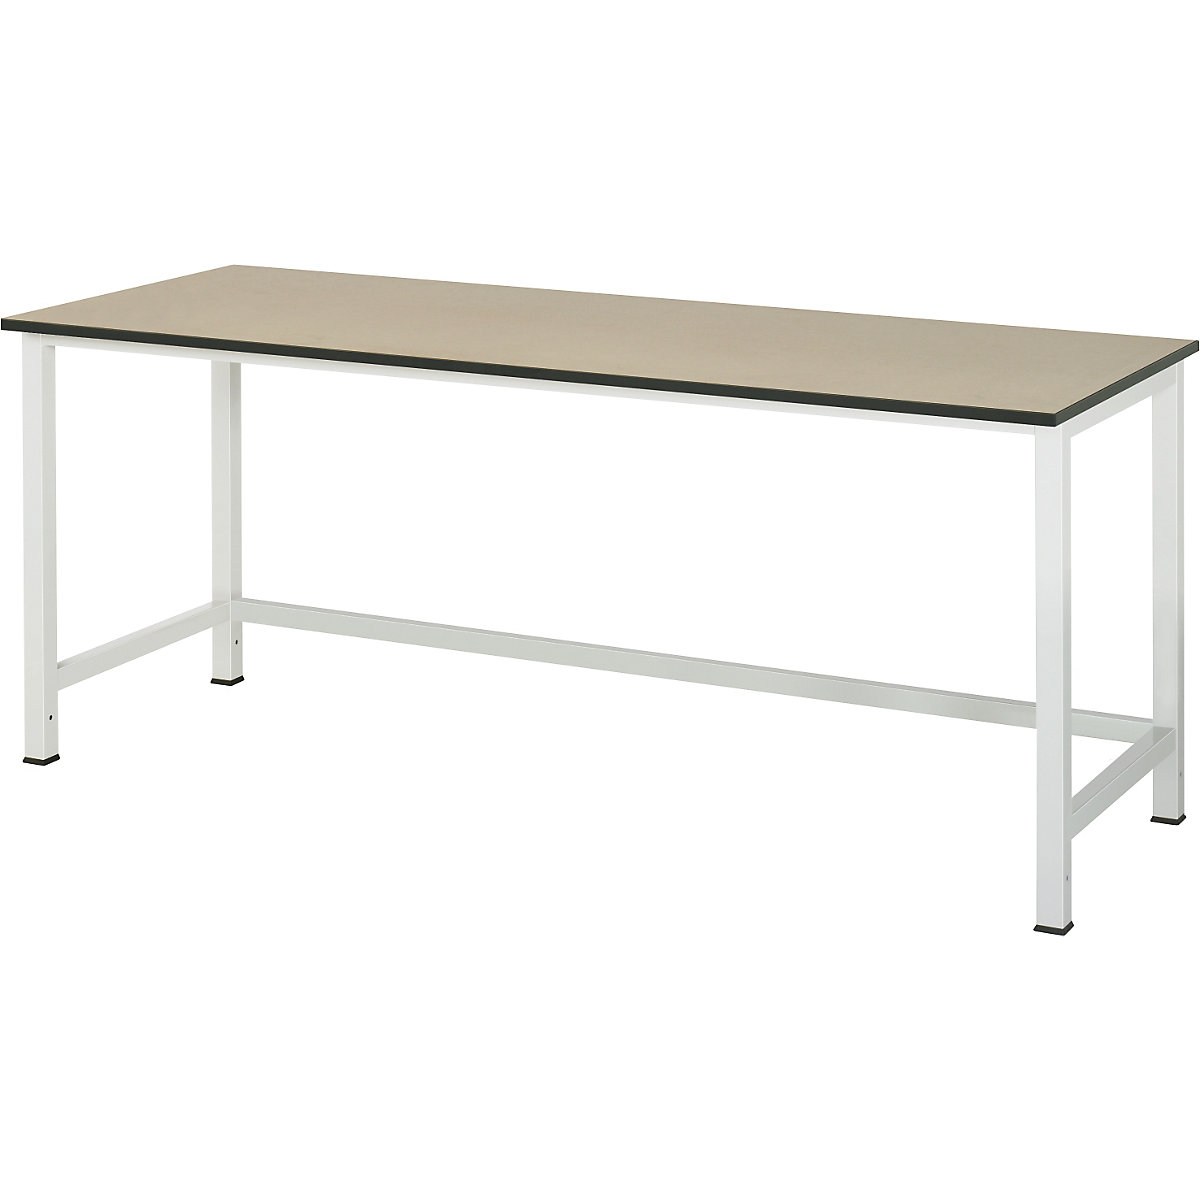 Work table for Series 900 workplace system – RAU, MDF, width 2000 mm-6